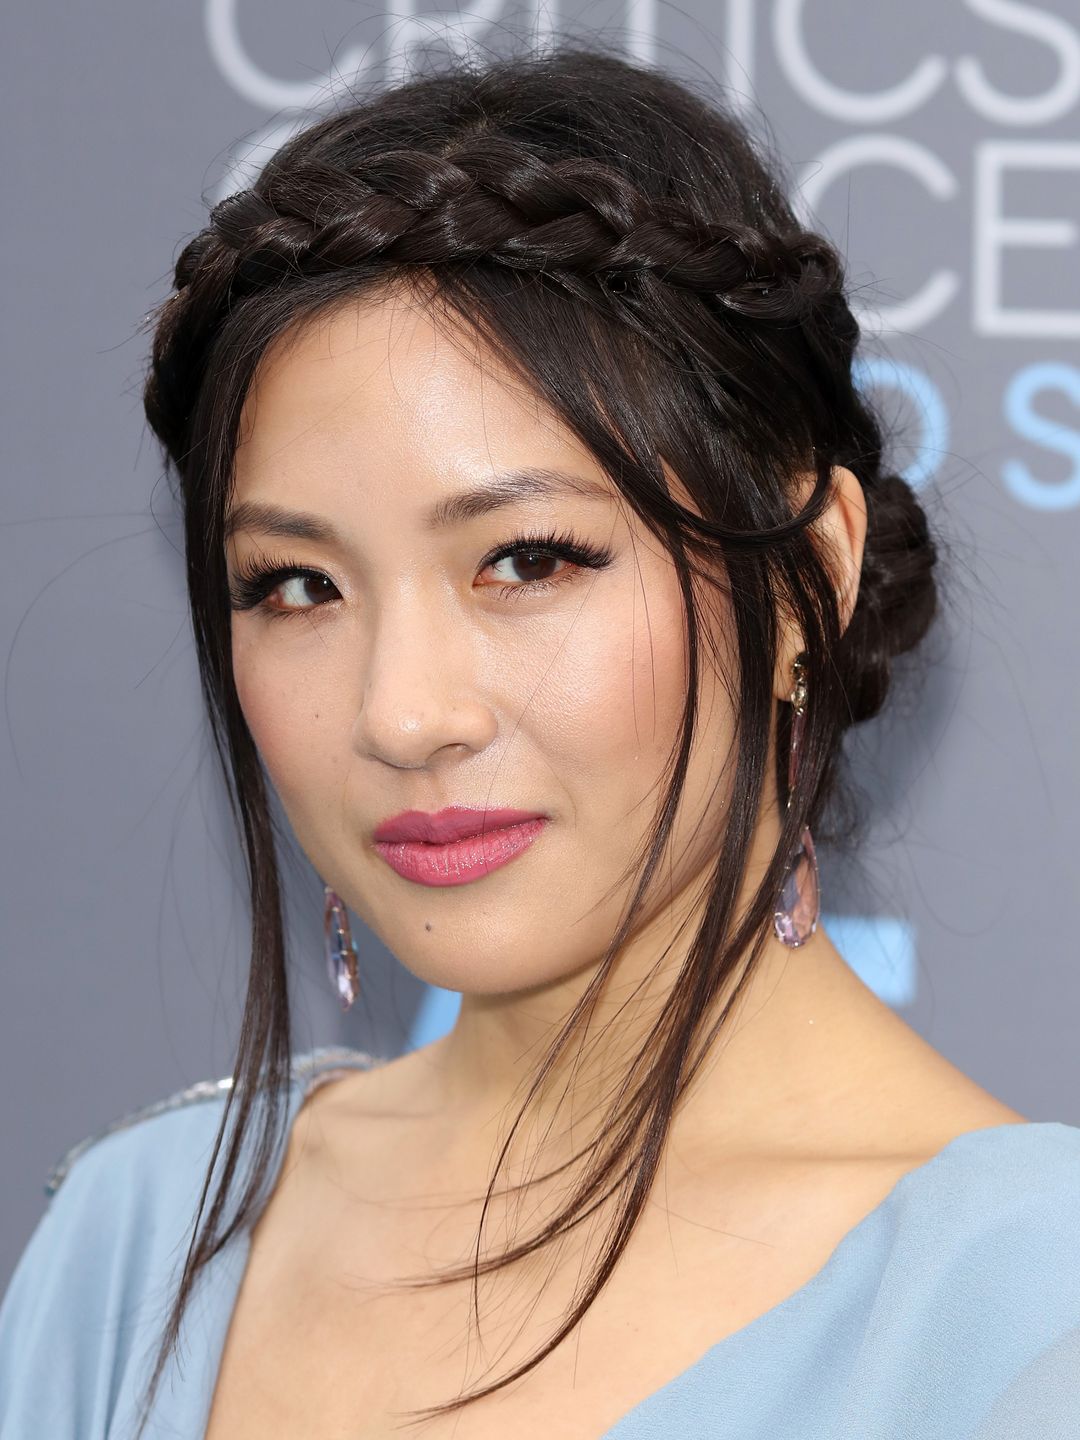 Constance Wu who is her mother